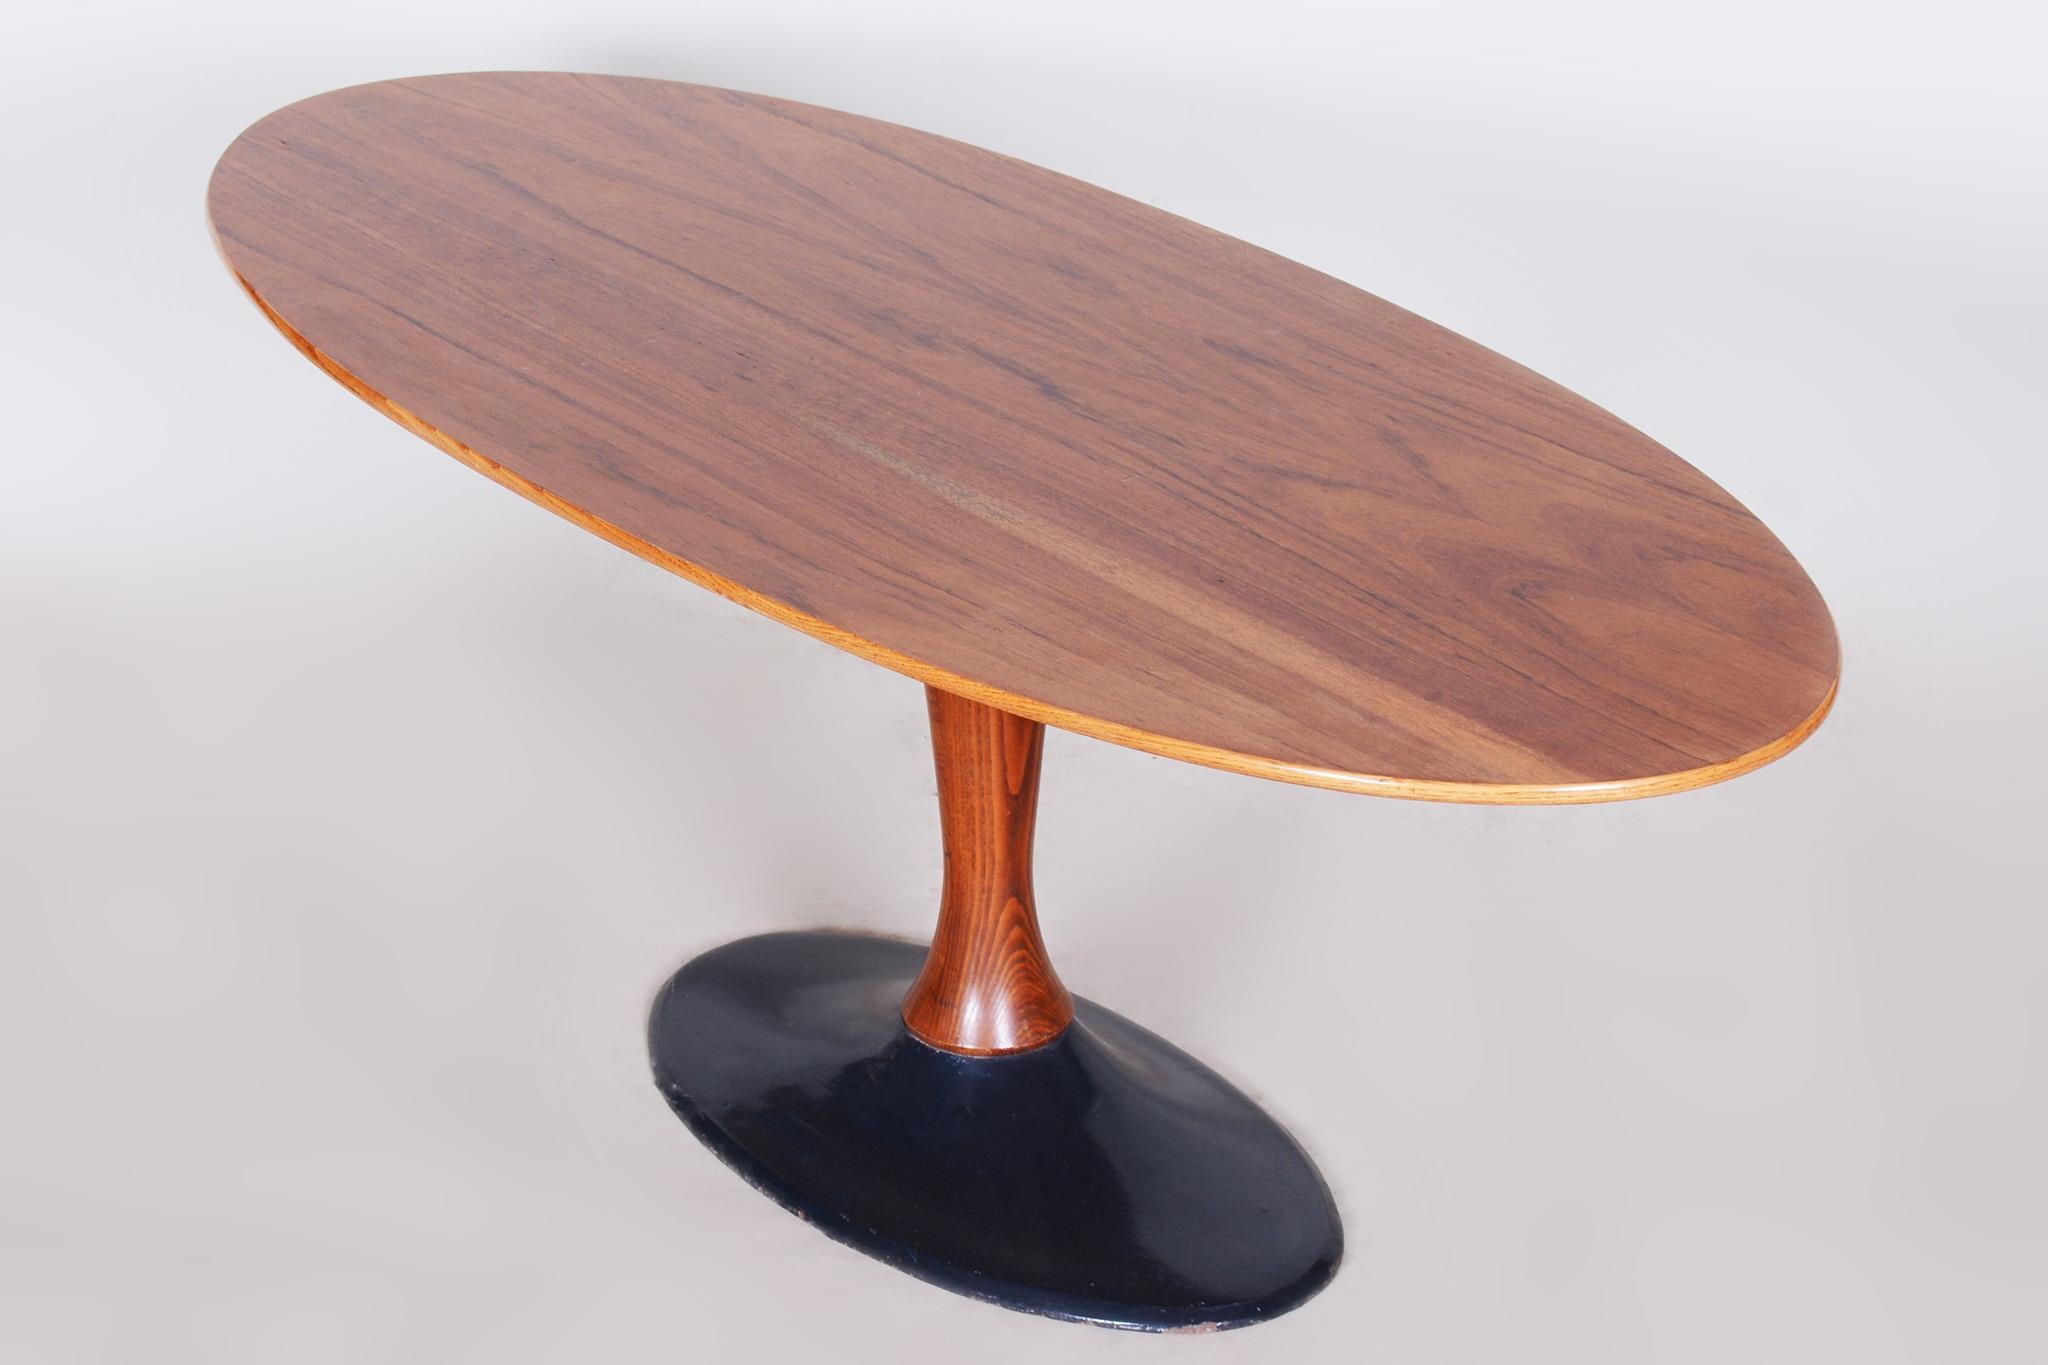 Czech Mid-Century Rosewood Oval Table with Cast Iron Base, 1950s For Sale 2